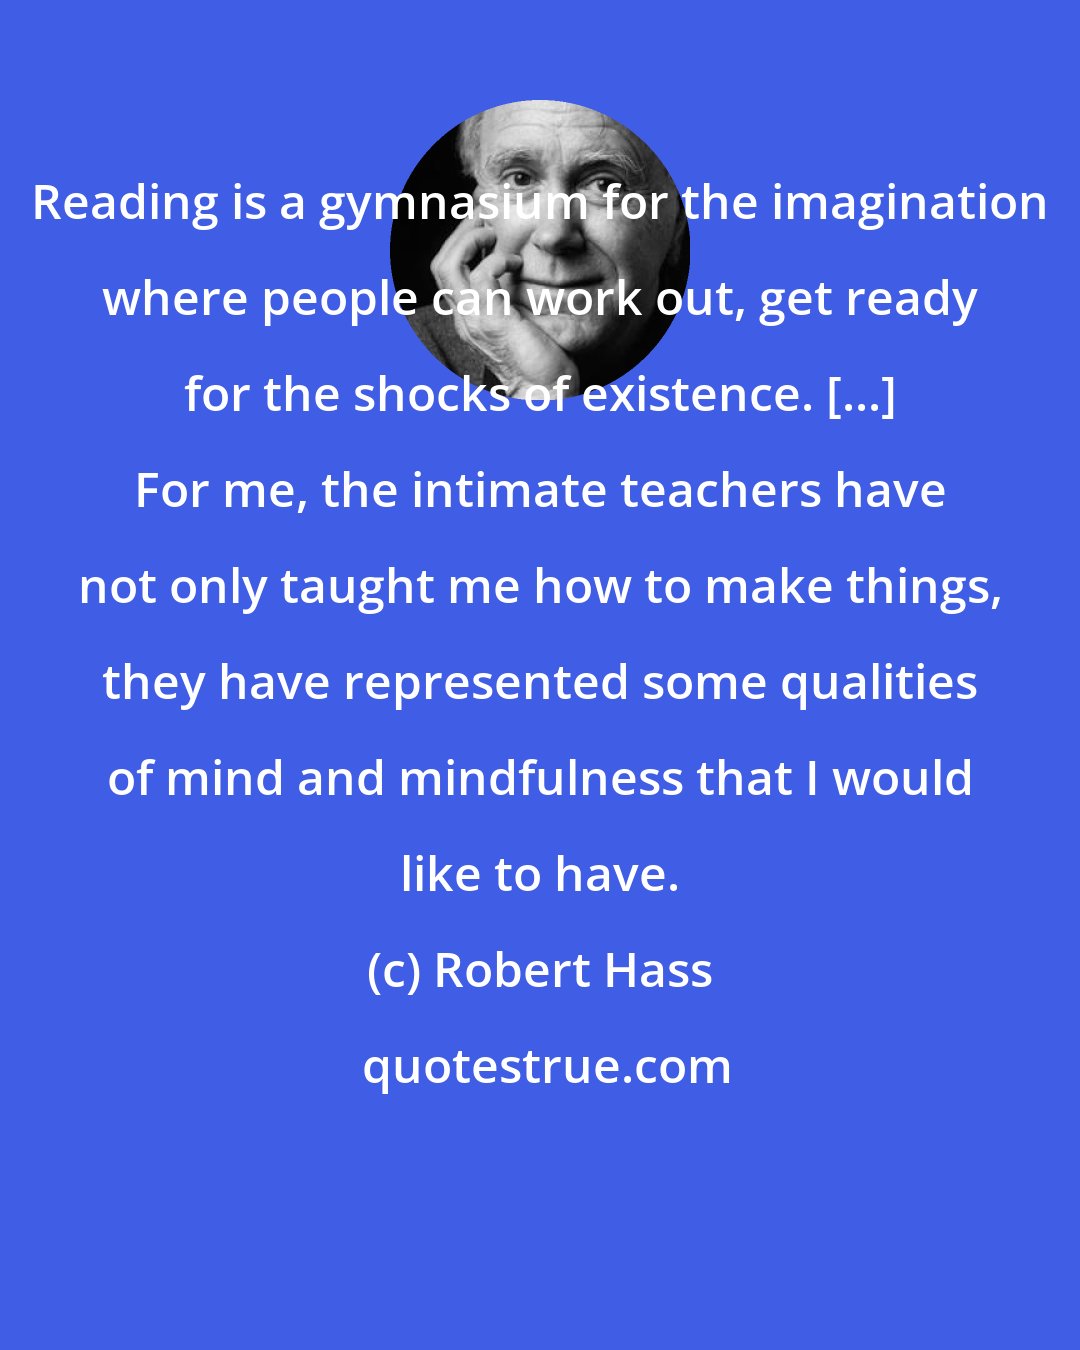 Robert Hass: Reading is a gymnasium for the imagination where people can work out, get ready for the shocks of existence. [...] For me, the intimate teachers have not only taught me how to make things, they have represented some qualities of mind and mindfulness that I would like to have.